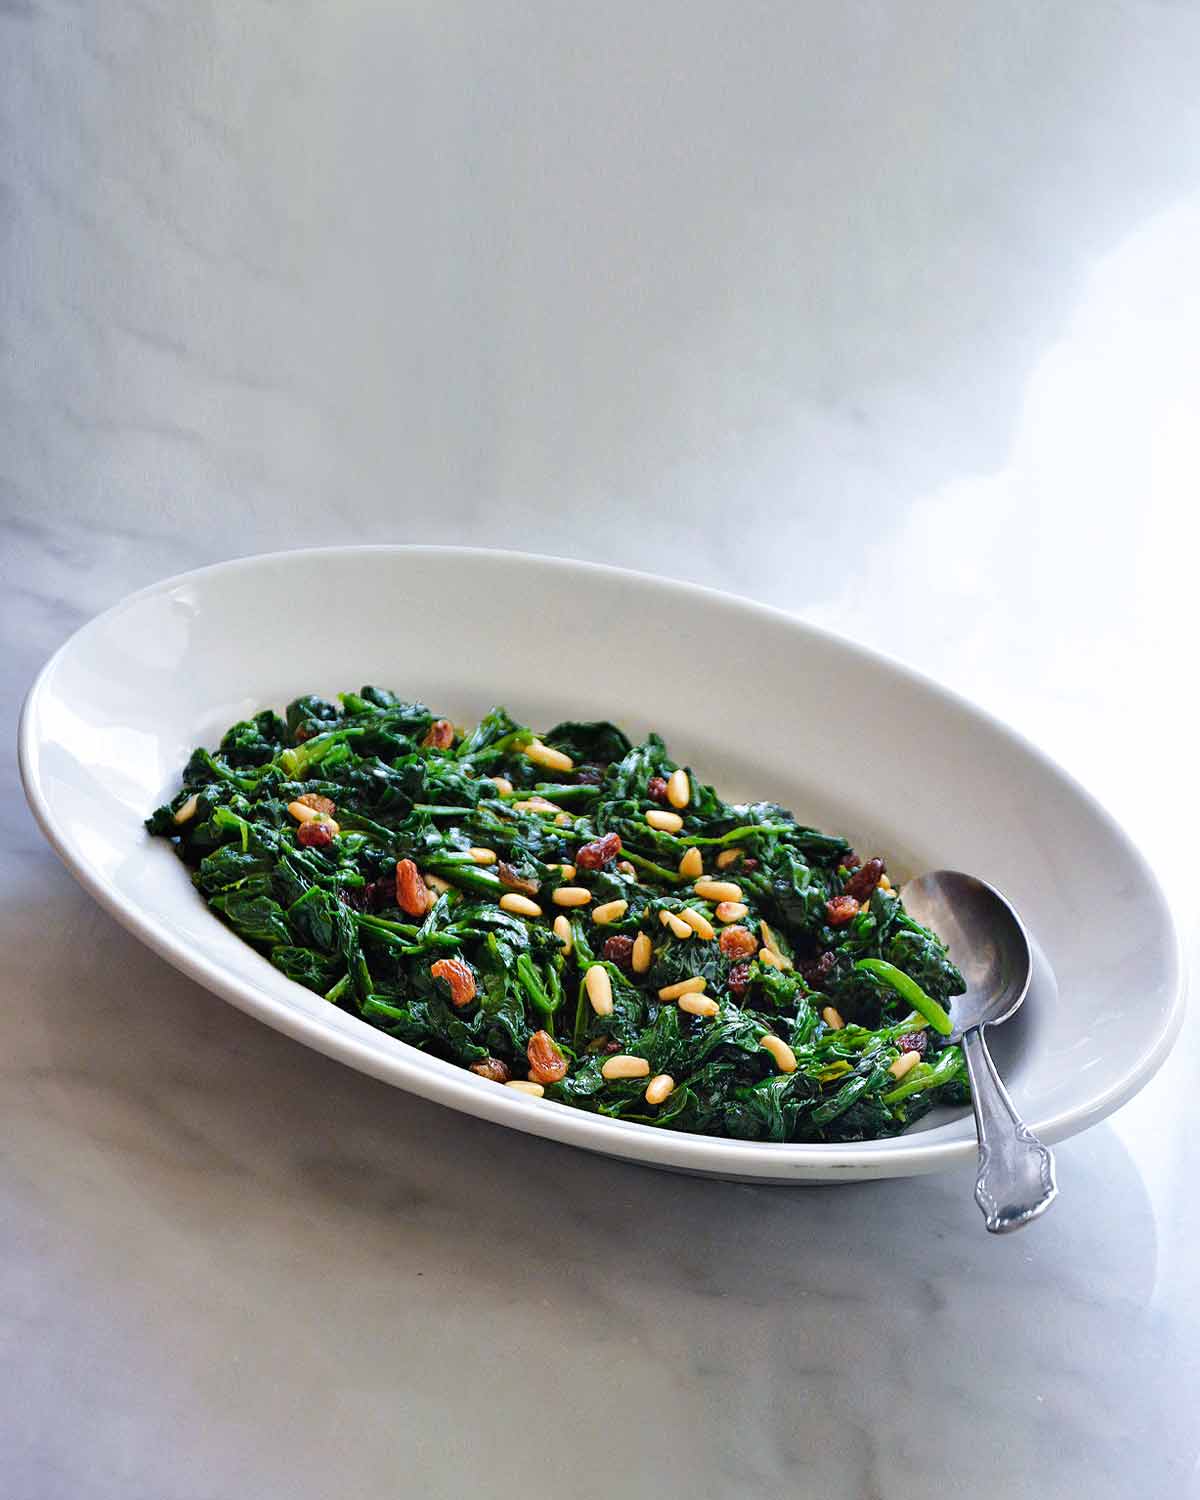 A white oval dish filled with cooked spinach with raisins and pine nuts sprinkled over the top and a spoon resting in the dish.